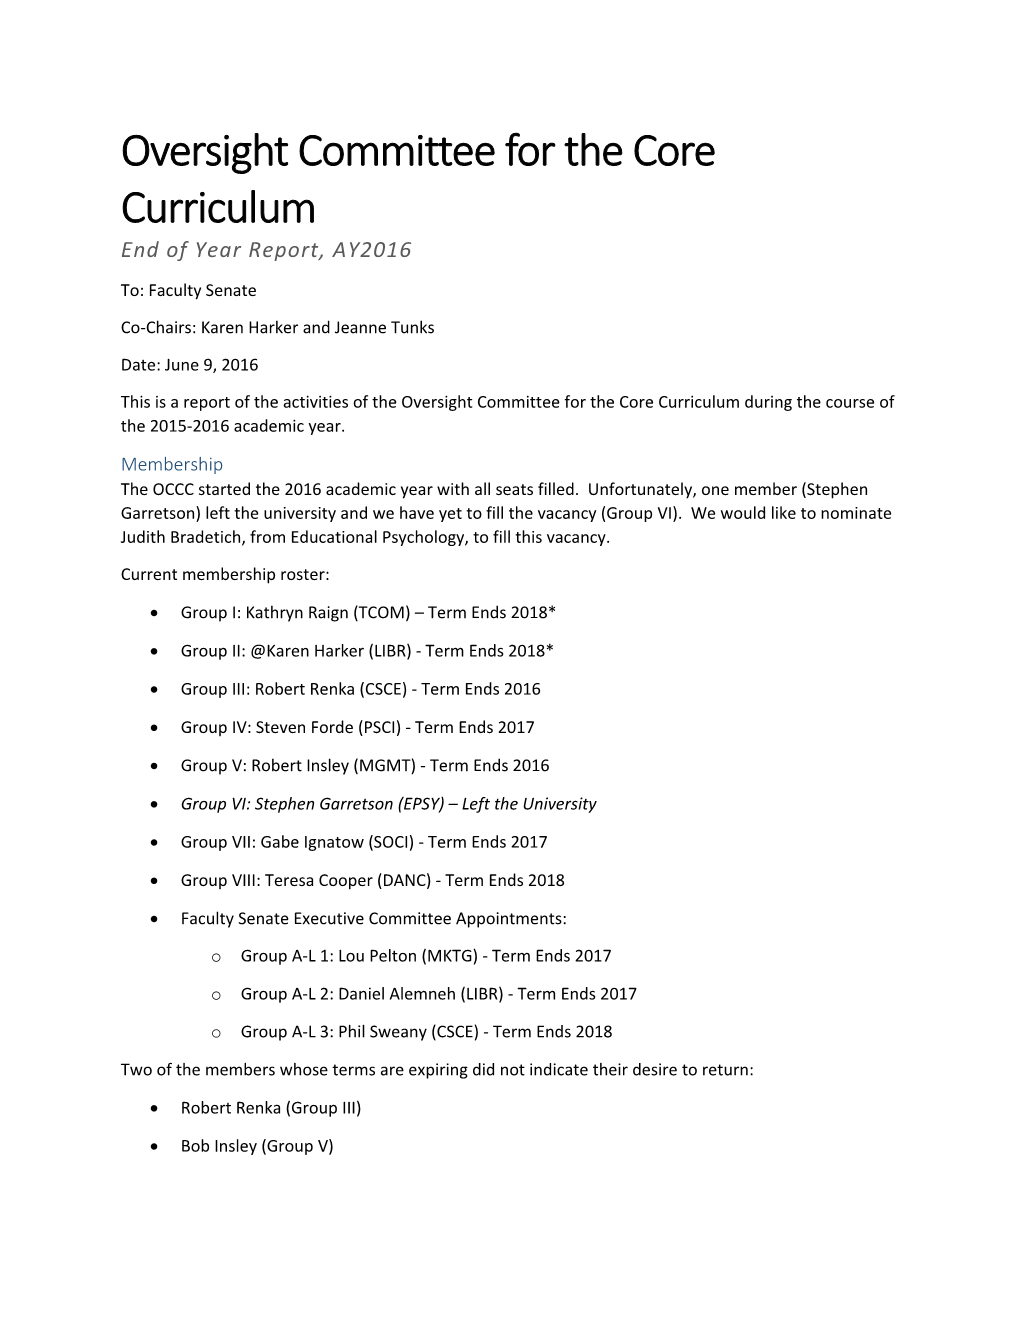 Oversight Committee for the Core Curriculum